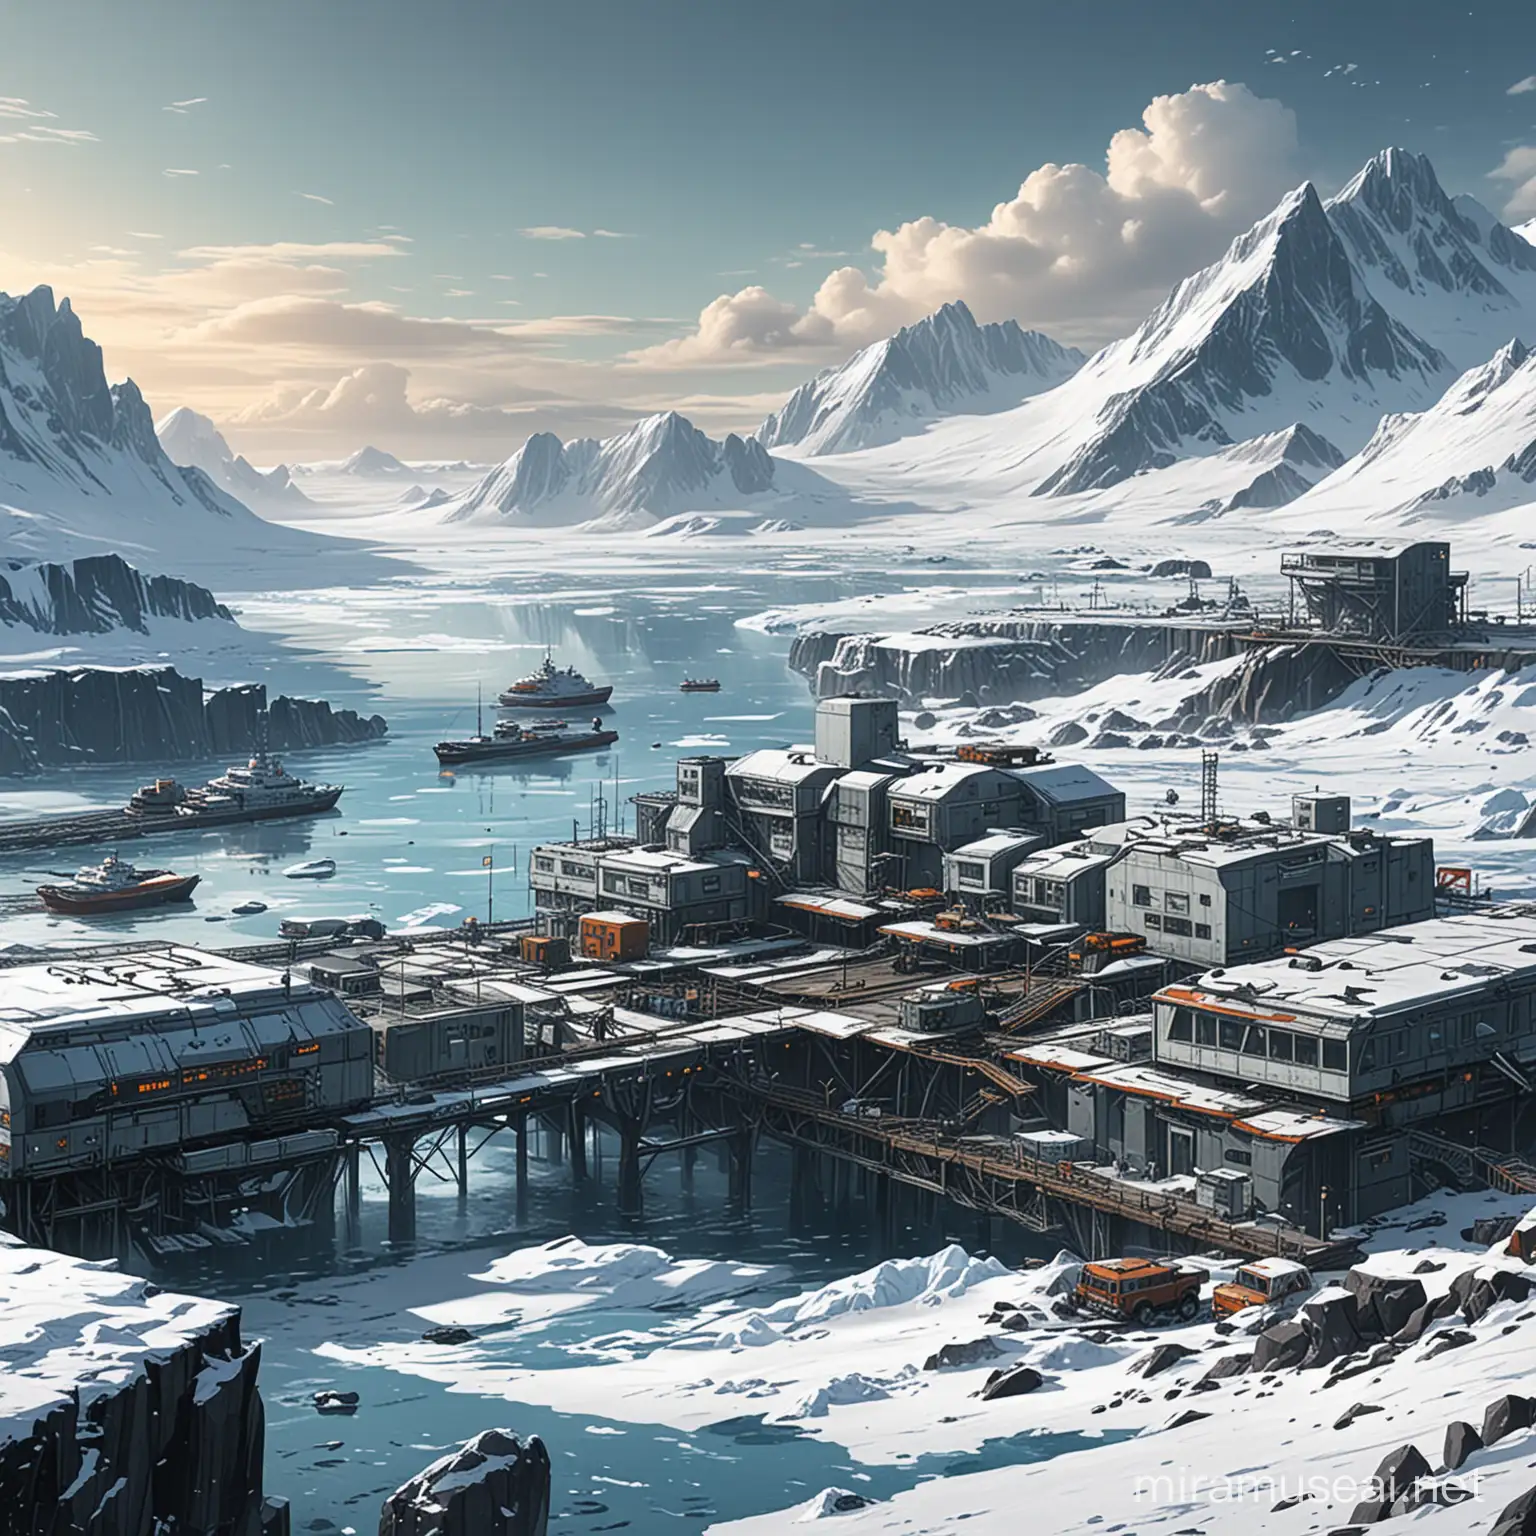 SciFi Dystopia Antarctic Port Station in Comics Style